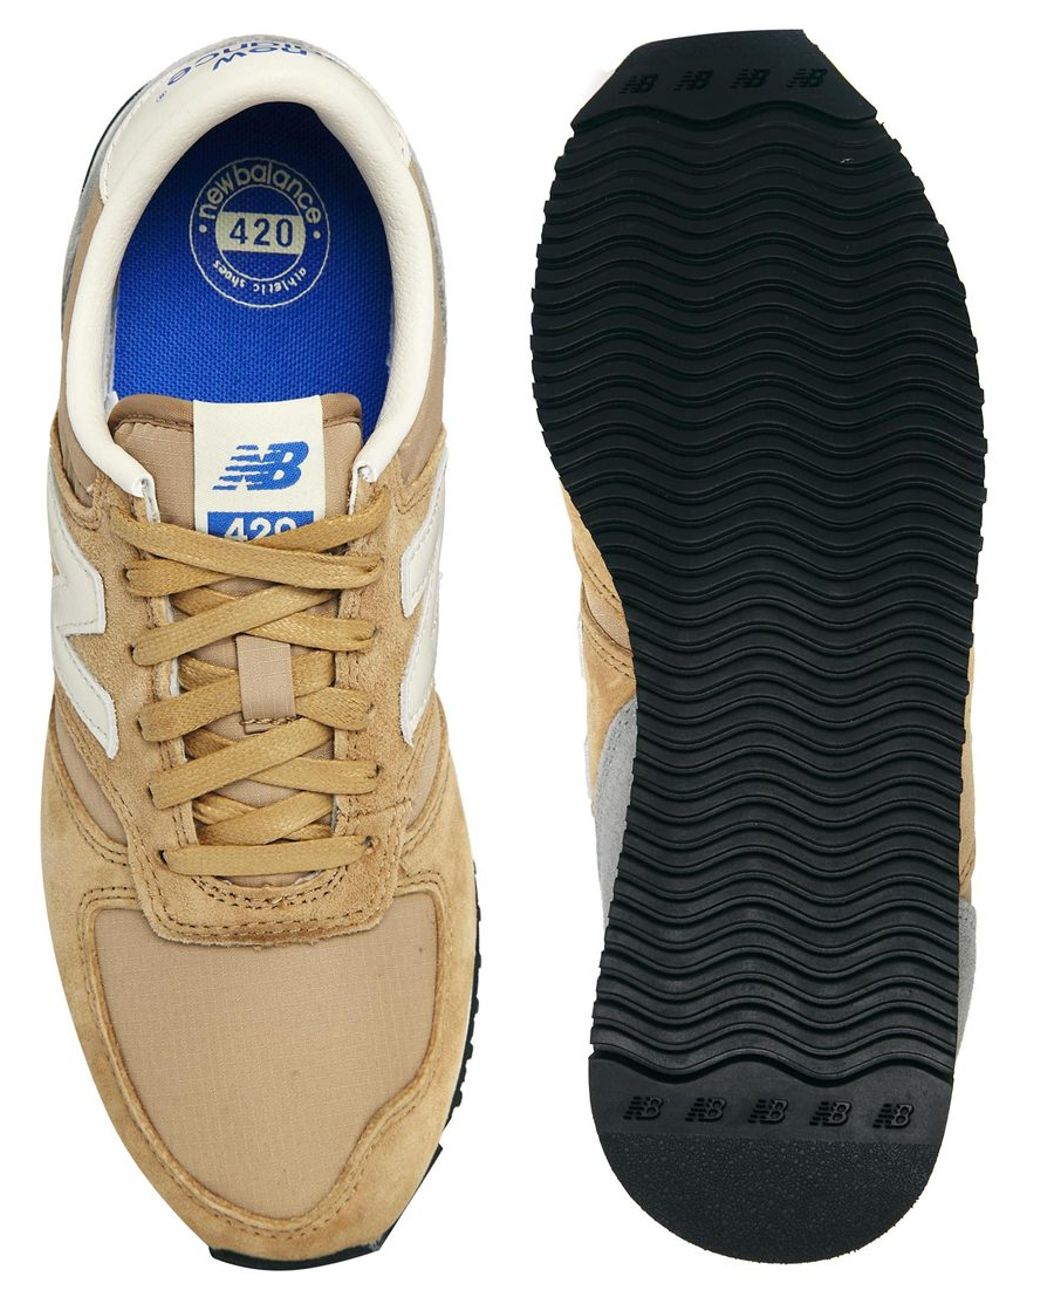 Samuel opvolger warm New Balance Camel 420 Trainers in Natural | Lyst